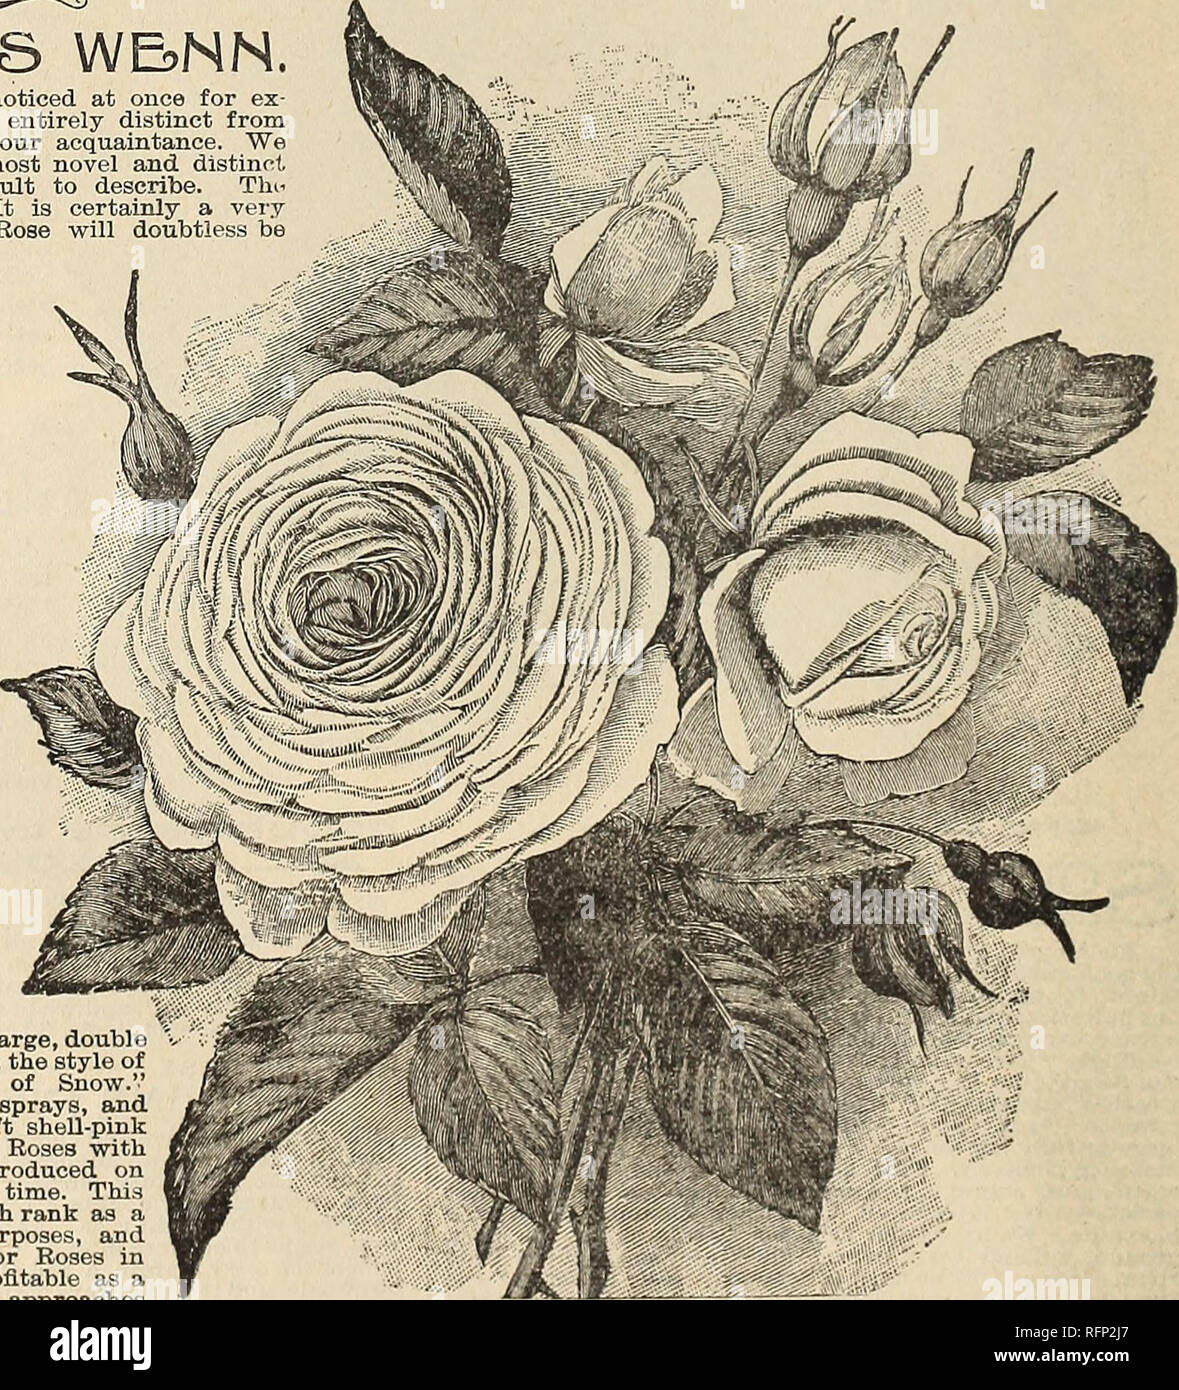 . Floral gems for 1896. Flowers Seeds Catalogs; Bulbs (Plants) Catalogs; Roses Catalogs; Plants, Ornamental Catalogs; Commercial catalogs Ohio Springfield; Flowers; Bulbs (Plants); Roses; Plants, Ornamental; Commercial catalogs. The Charming New Tea Rose^ LUCIOLE. A new French Tea Rose of much more than ordinary merit, very bright carmine rose, tinted and shaded with saffron, the base of the petals being copper-yellow with reverse a rosy bronze, large, pointed, very double and very sweet-scented; flower stem roughened like a Moss Rose, the coloring is entirely new and very brilliant. The open  Stock Photo